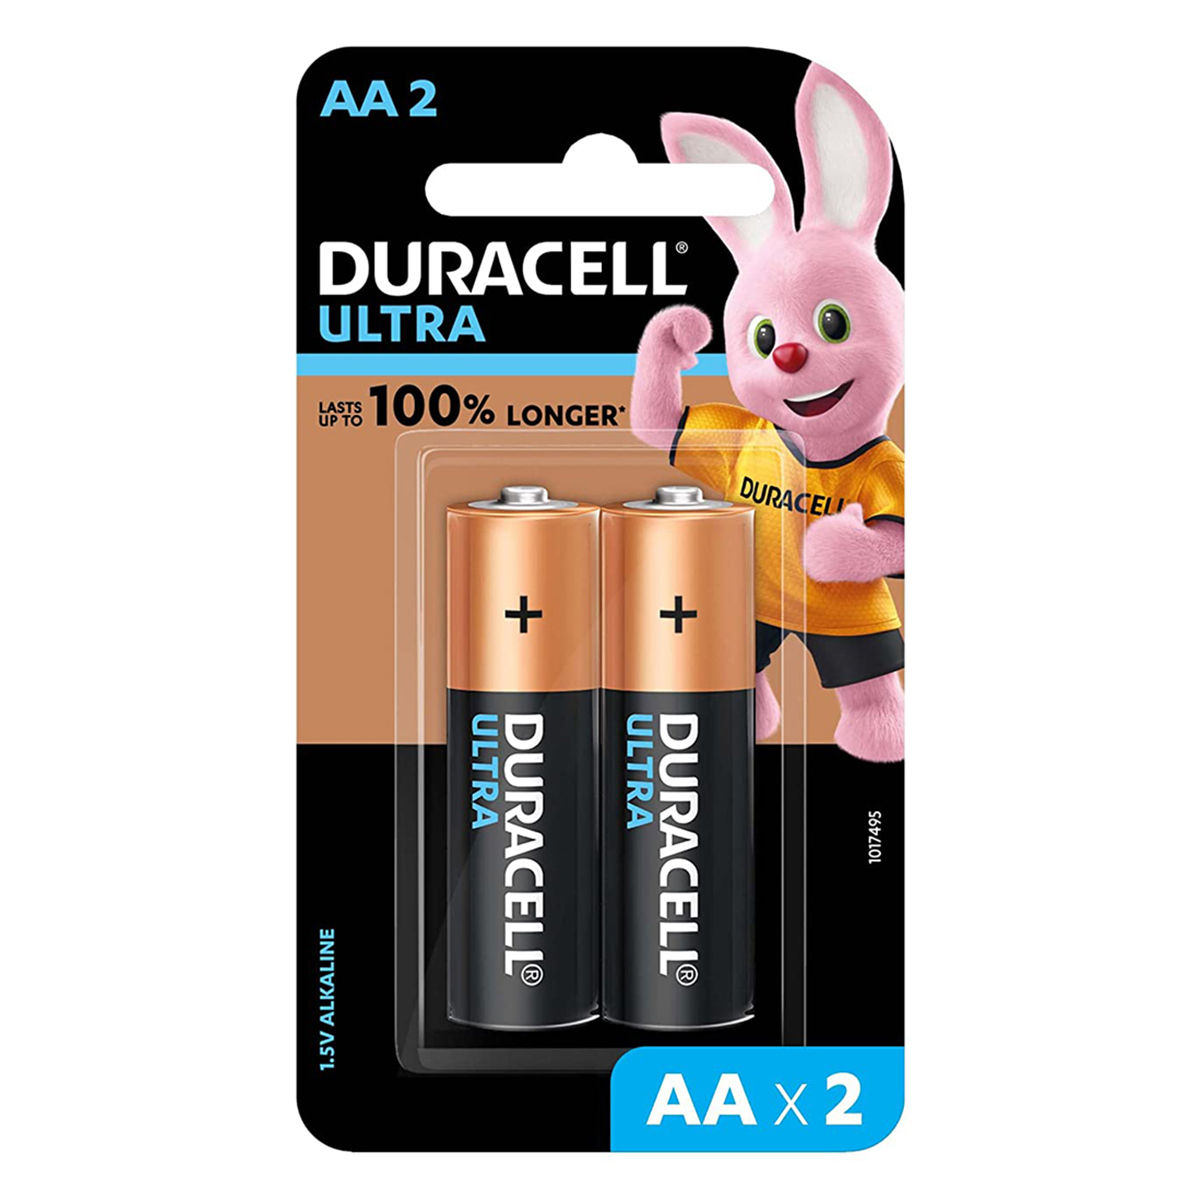 Buy Duracell Ultra AA Batteries, 2 Count Online